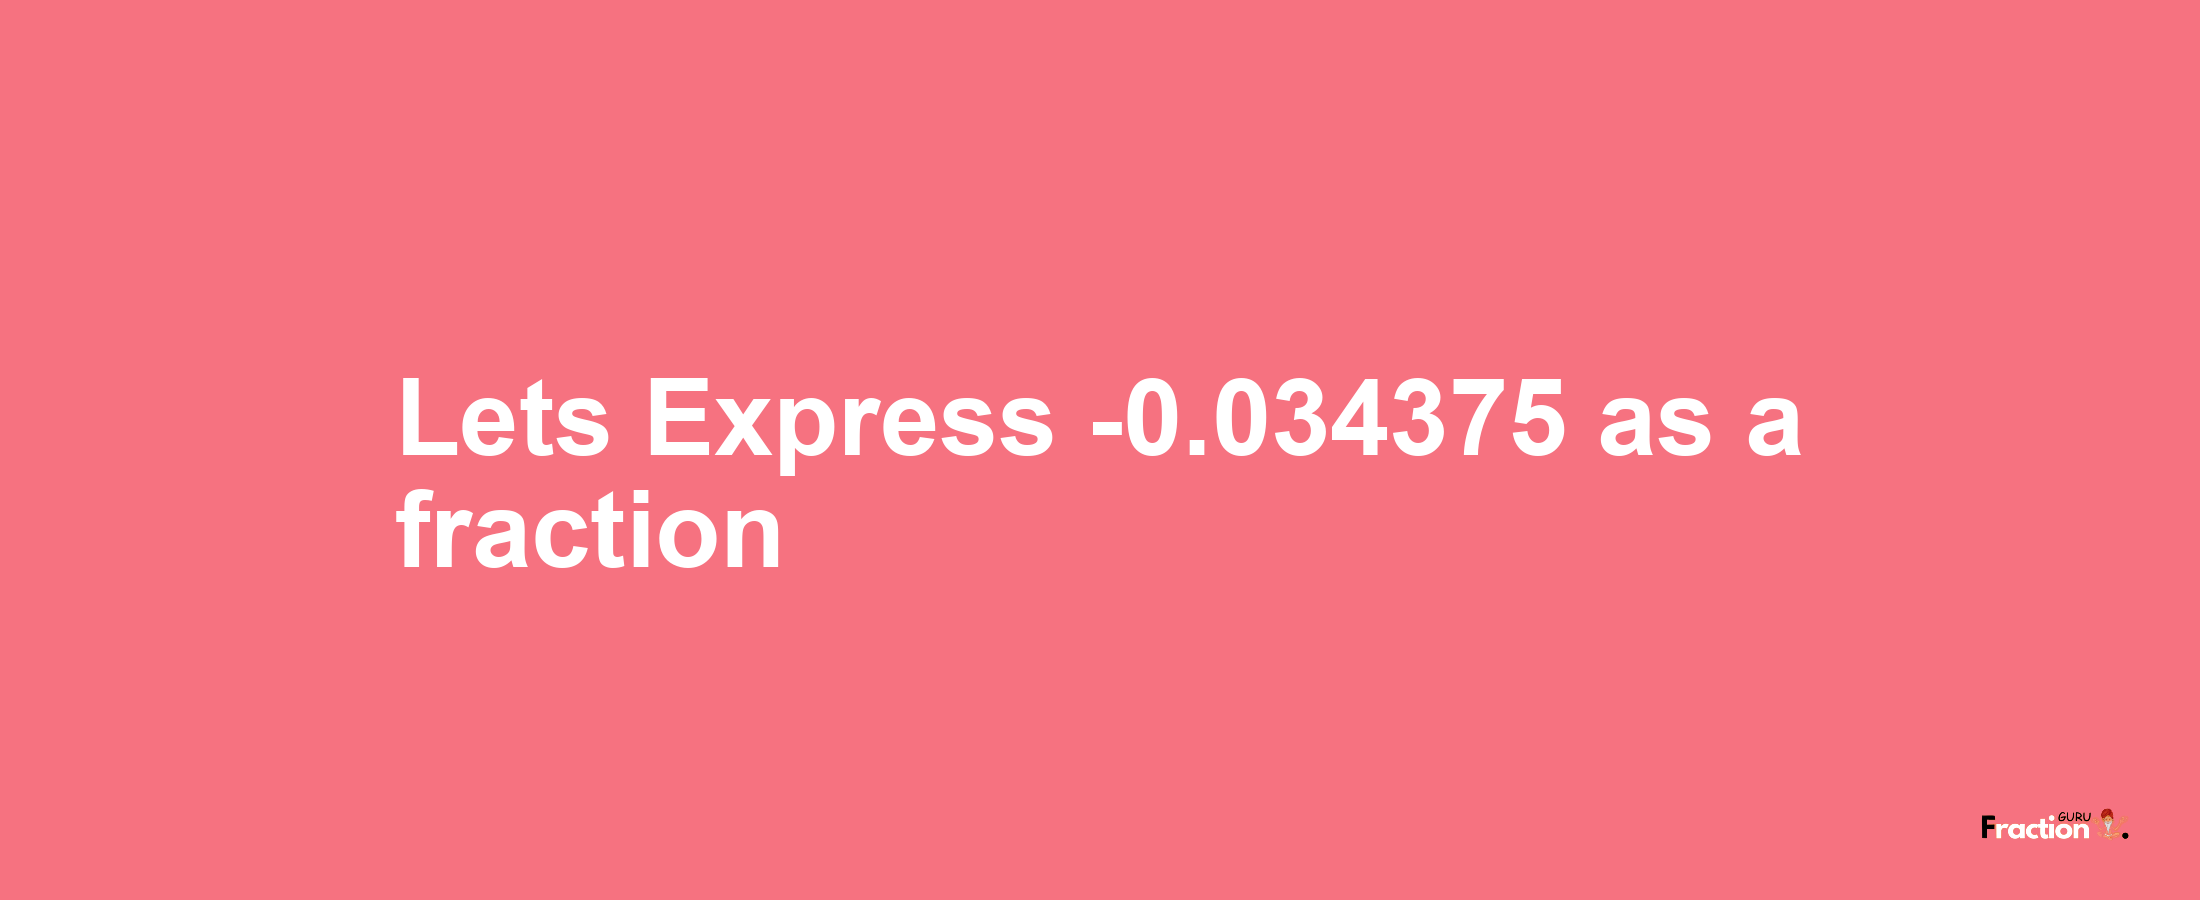 Lets Express -0.034375 as afraction